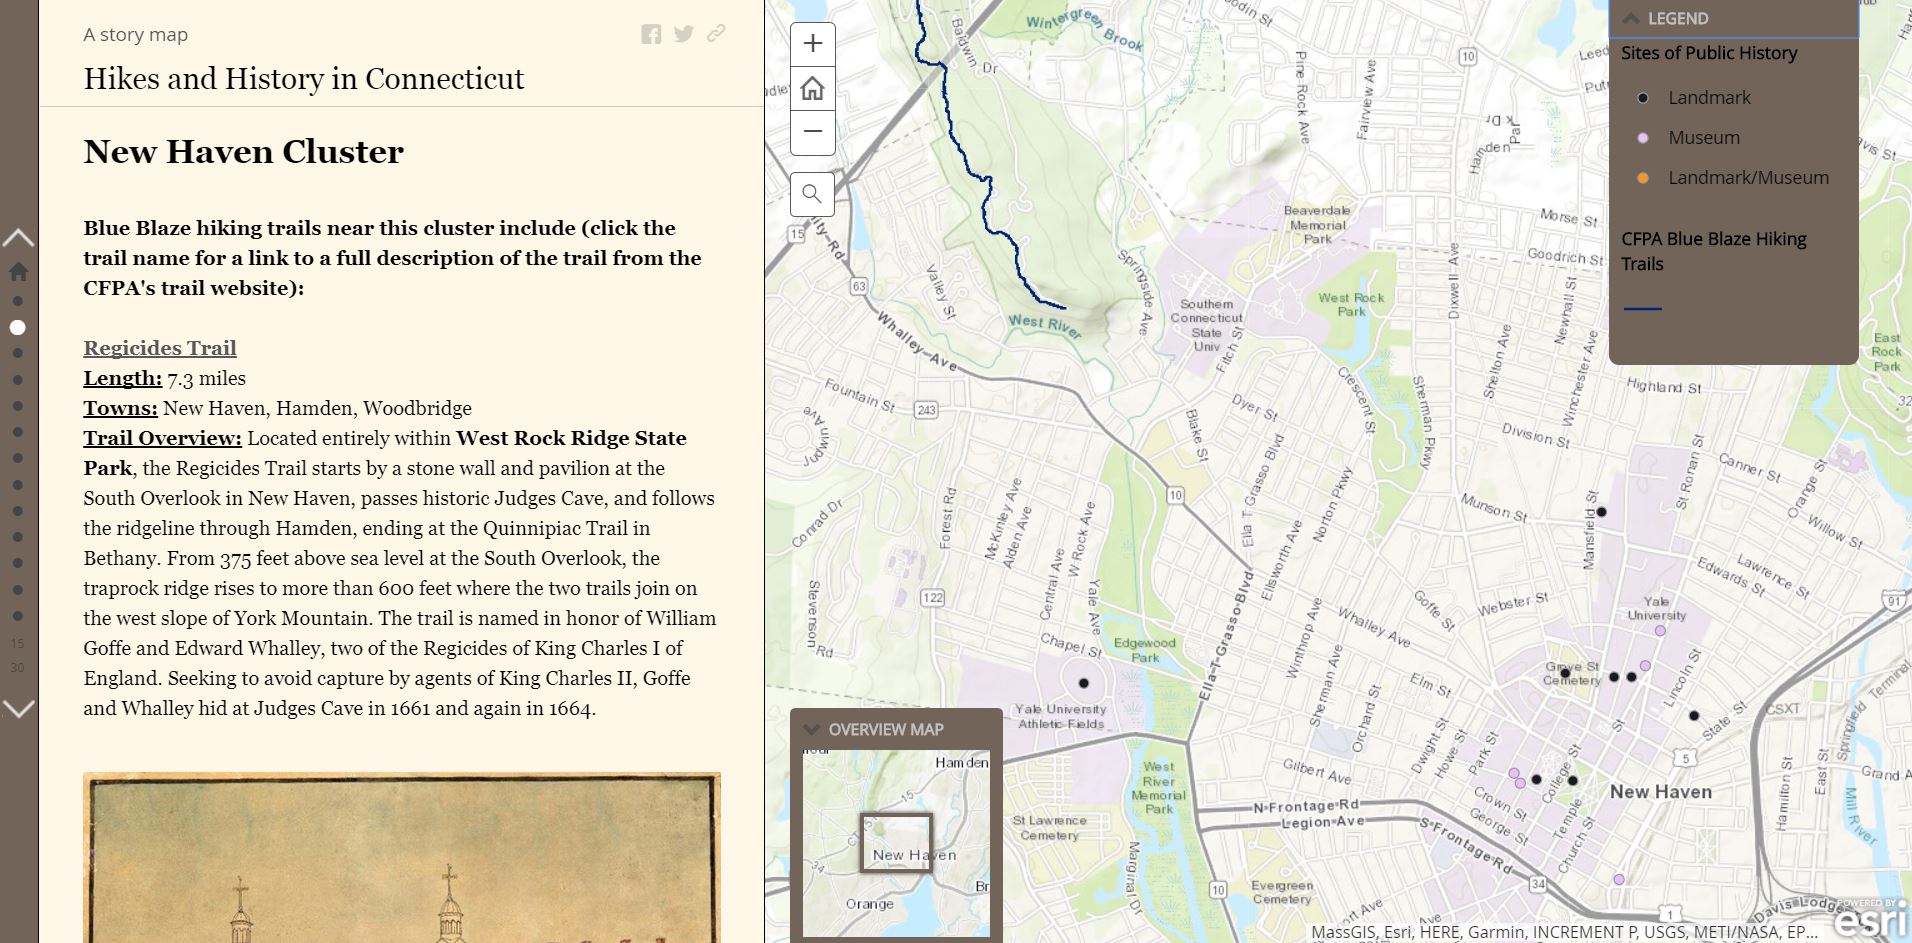 The public history group created a Story Map titled "Hikes and History in Connecticut. Steven Chen ’18 and Ilana Newman ’18 located multiple cultural sites in the State of Connecticut that provide an opportunity to explore new methods of learning. 